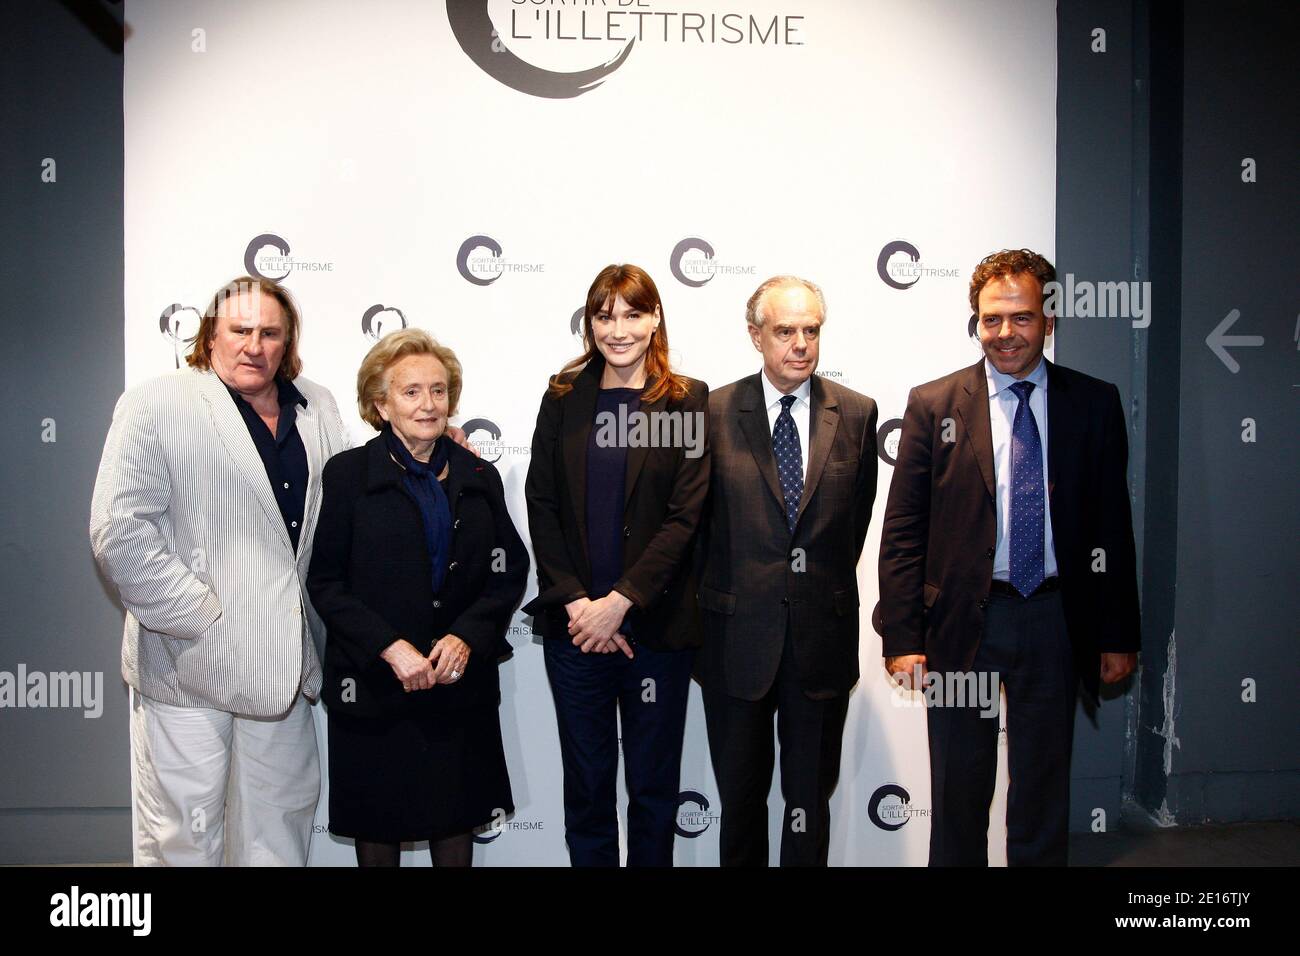 French actor Gerard Depardieu, former first lady Bernadette Chirac, French First Lady Carla Bruni-Sarkozy, Culture Minister Frederic Mitterrand and Minister for National Education, Youth and Voluntary Organizations Luc Chatel pose before the launch of Bruni-Sarkozy's foundation to combat illiteracy at Centre Pompidou modern art museum, also known as Beaubourg, in Paris, France on May 17, 2011. French President Nicolas Sarkozy's father, Pal Sarkozy was quoted by a German newspaper Bild today as saying that first lady Carla Bruni is expecting a child, apparently confirming the subject of weeks o Stock Photo